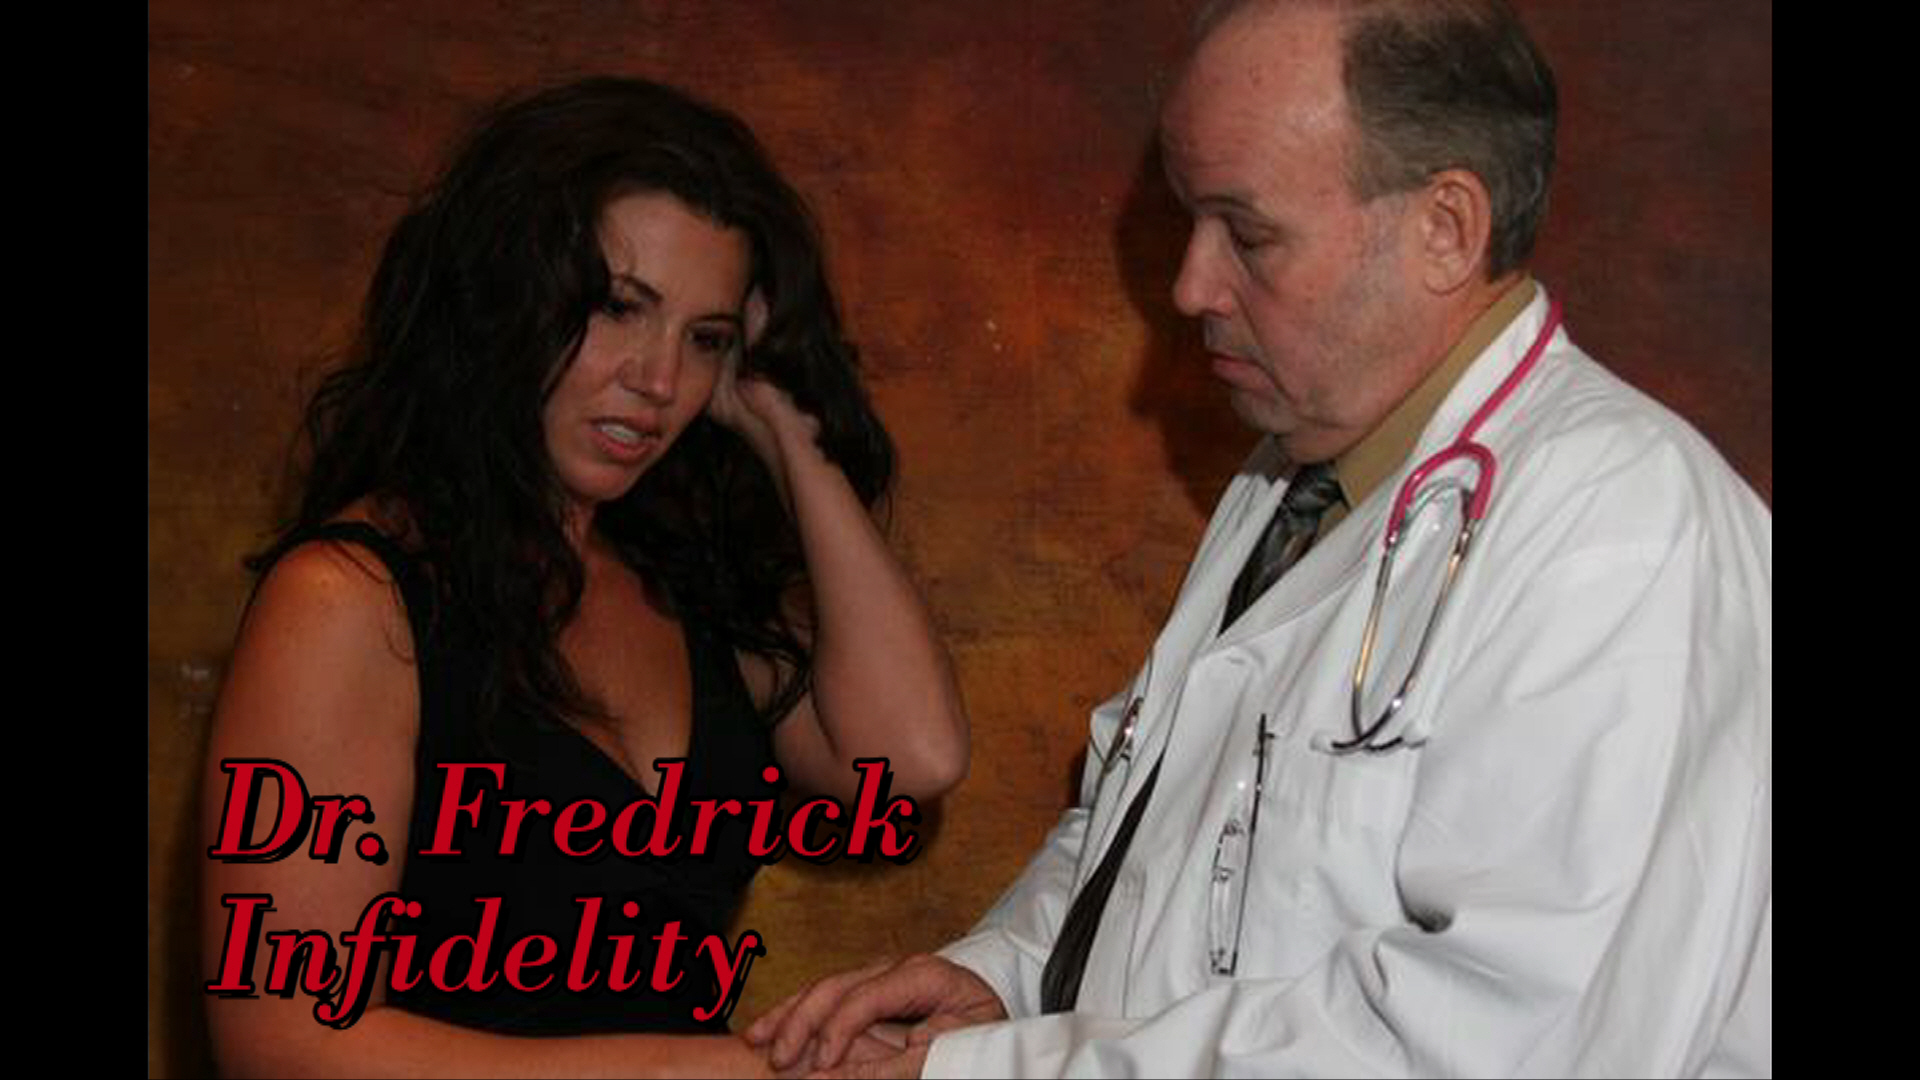 Feature film, Infidelity Supporting/Dr. Frederick